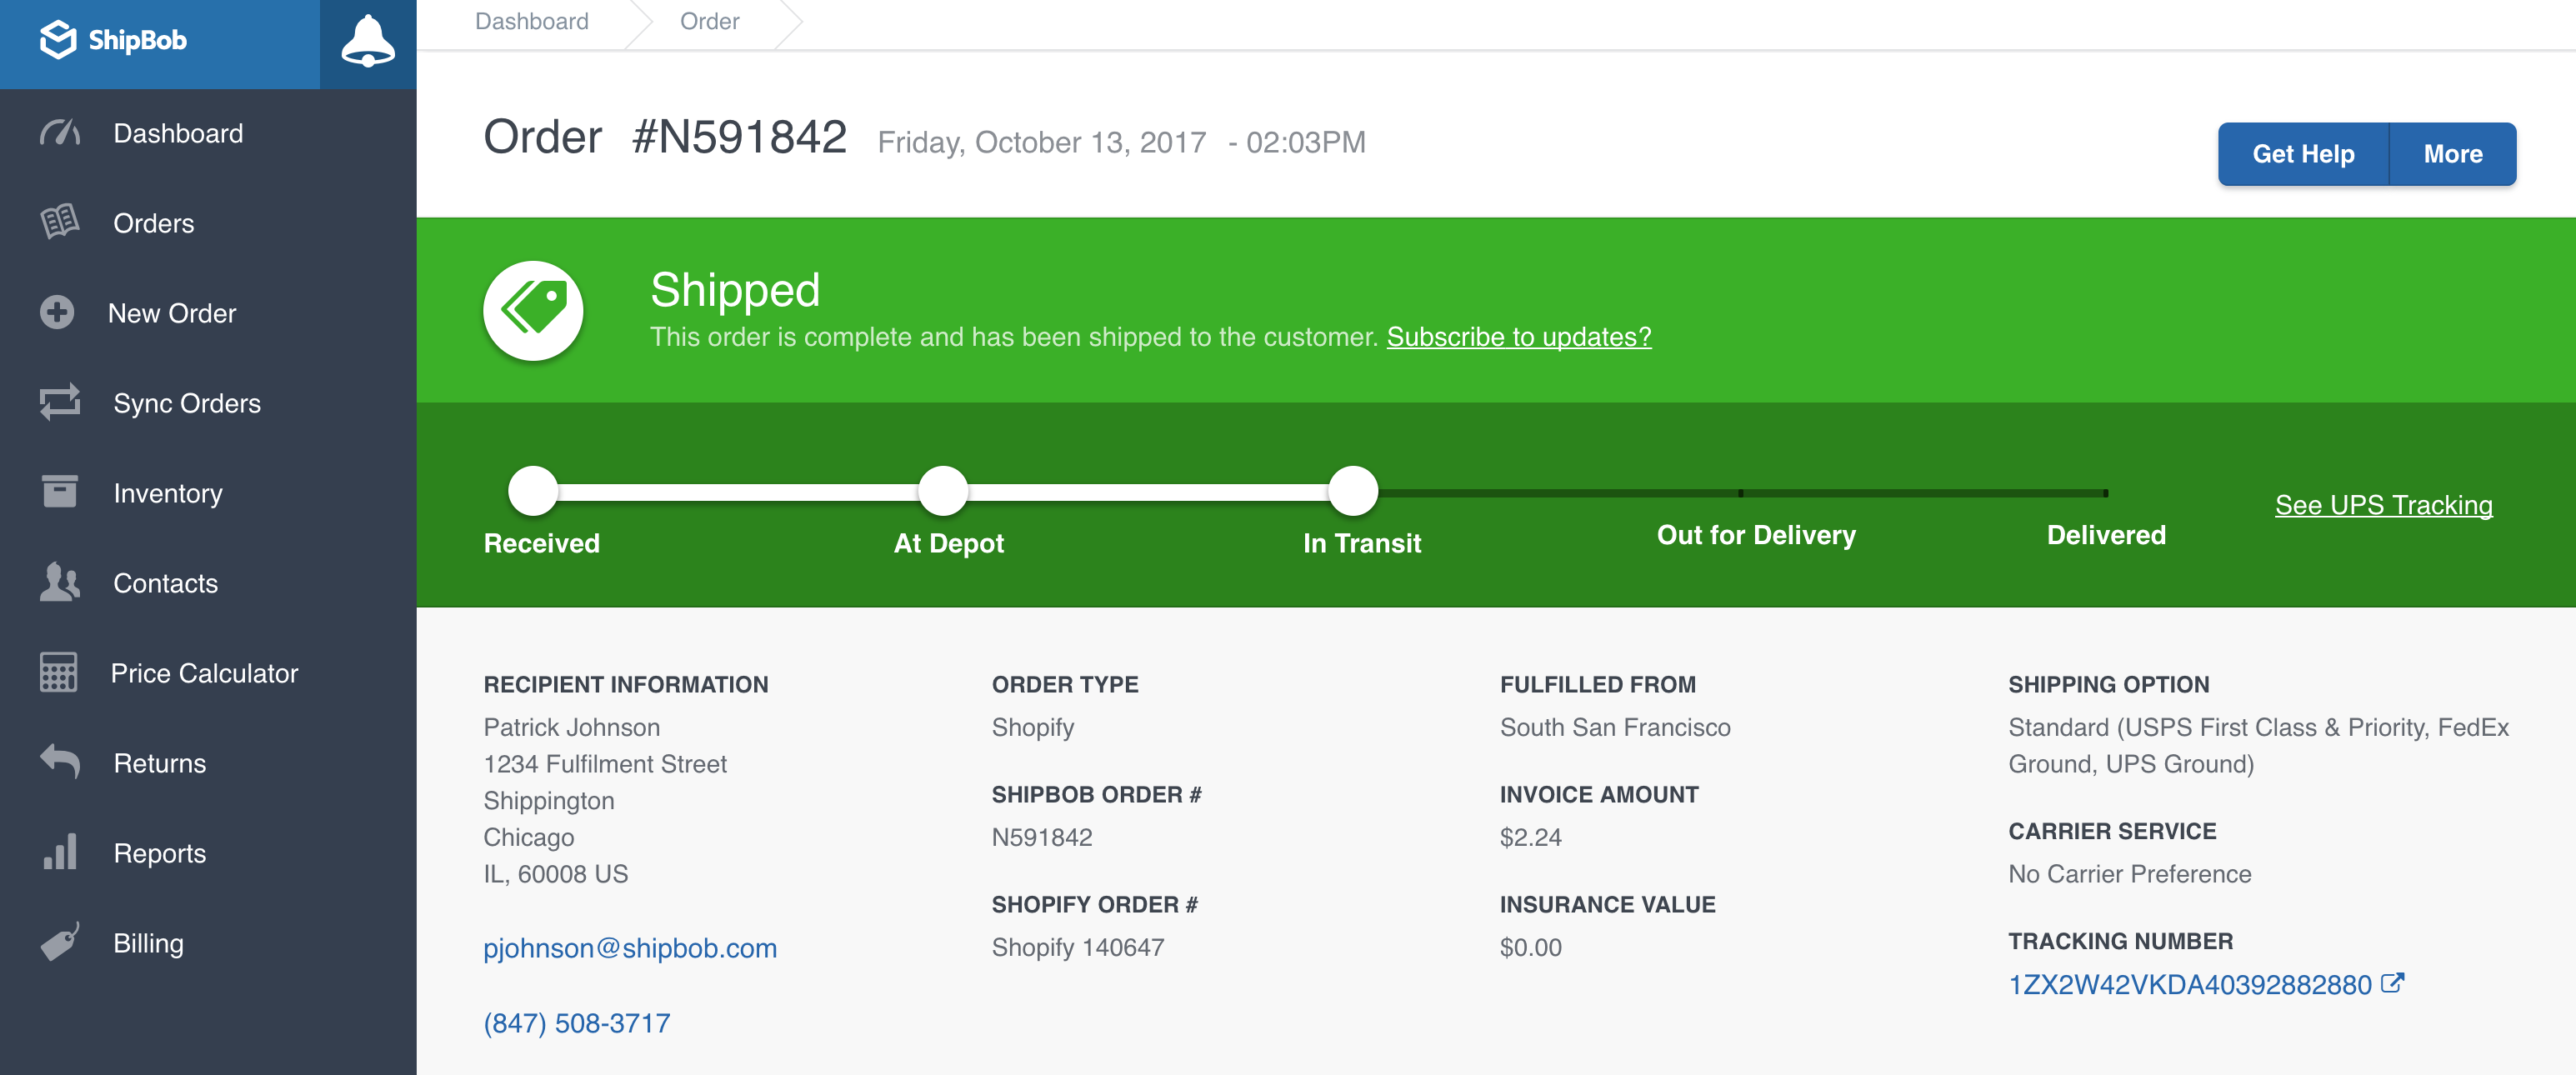 shipbob order tracking shopify order shipped